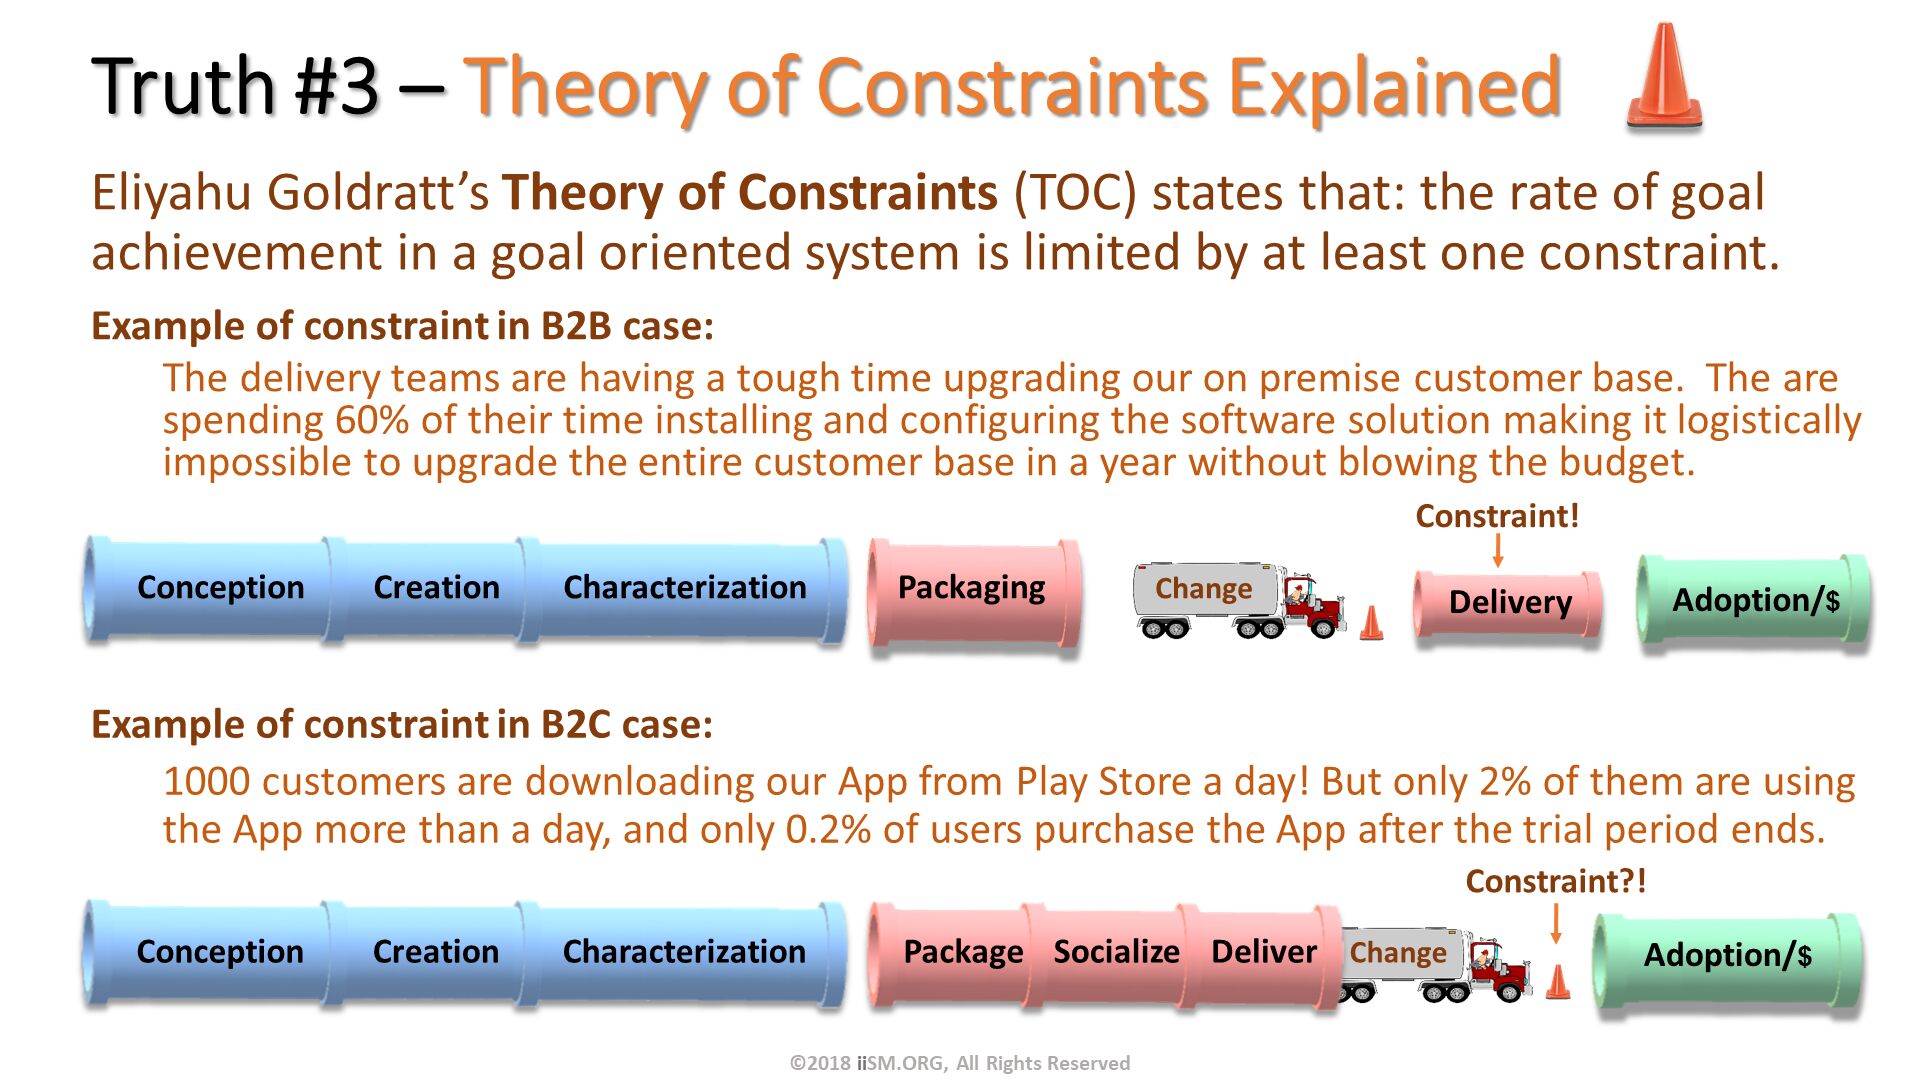 Truth #3 – Theory of Constraints Explained. Eliyahu Goldratt’s Theory of Constraints (TOC) states that: the rate of goal achievement in a goal oriented system is limited by at least one constraint. Example of constraint in B2B case: 
The delivery teams are having a tough time upgrading our on premise customer base.  The are spending 60% of their time installing and configuring the software solution making it logistically impossible to upgrade the entire customer base in a year without blowing the budget. Example of constraint in B2C case: 
1000 customers are downloading our App from Play Store a day! But only 2% of them are using the App more than a day, and only 0.2% of users purchase the App after the trial period ends.
. Constraint!. Constraint?!. ©2018 iiSM.ORG, All Rights Reserved. Adoption/$. 